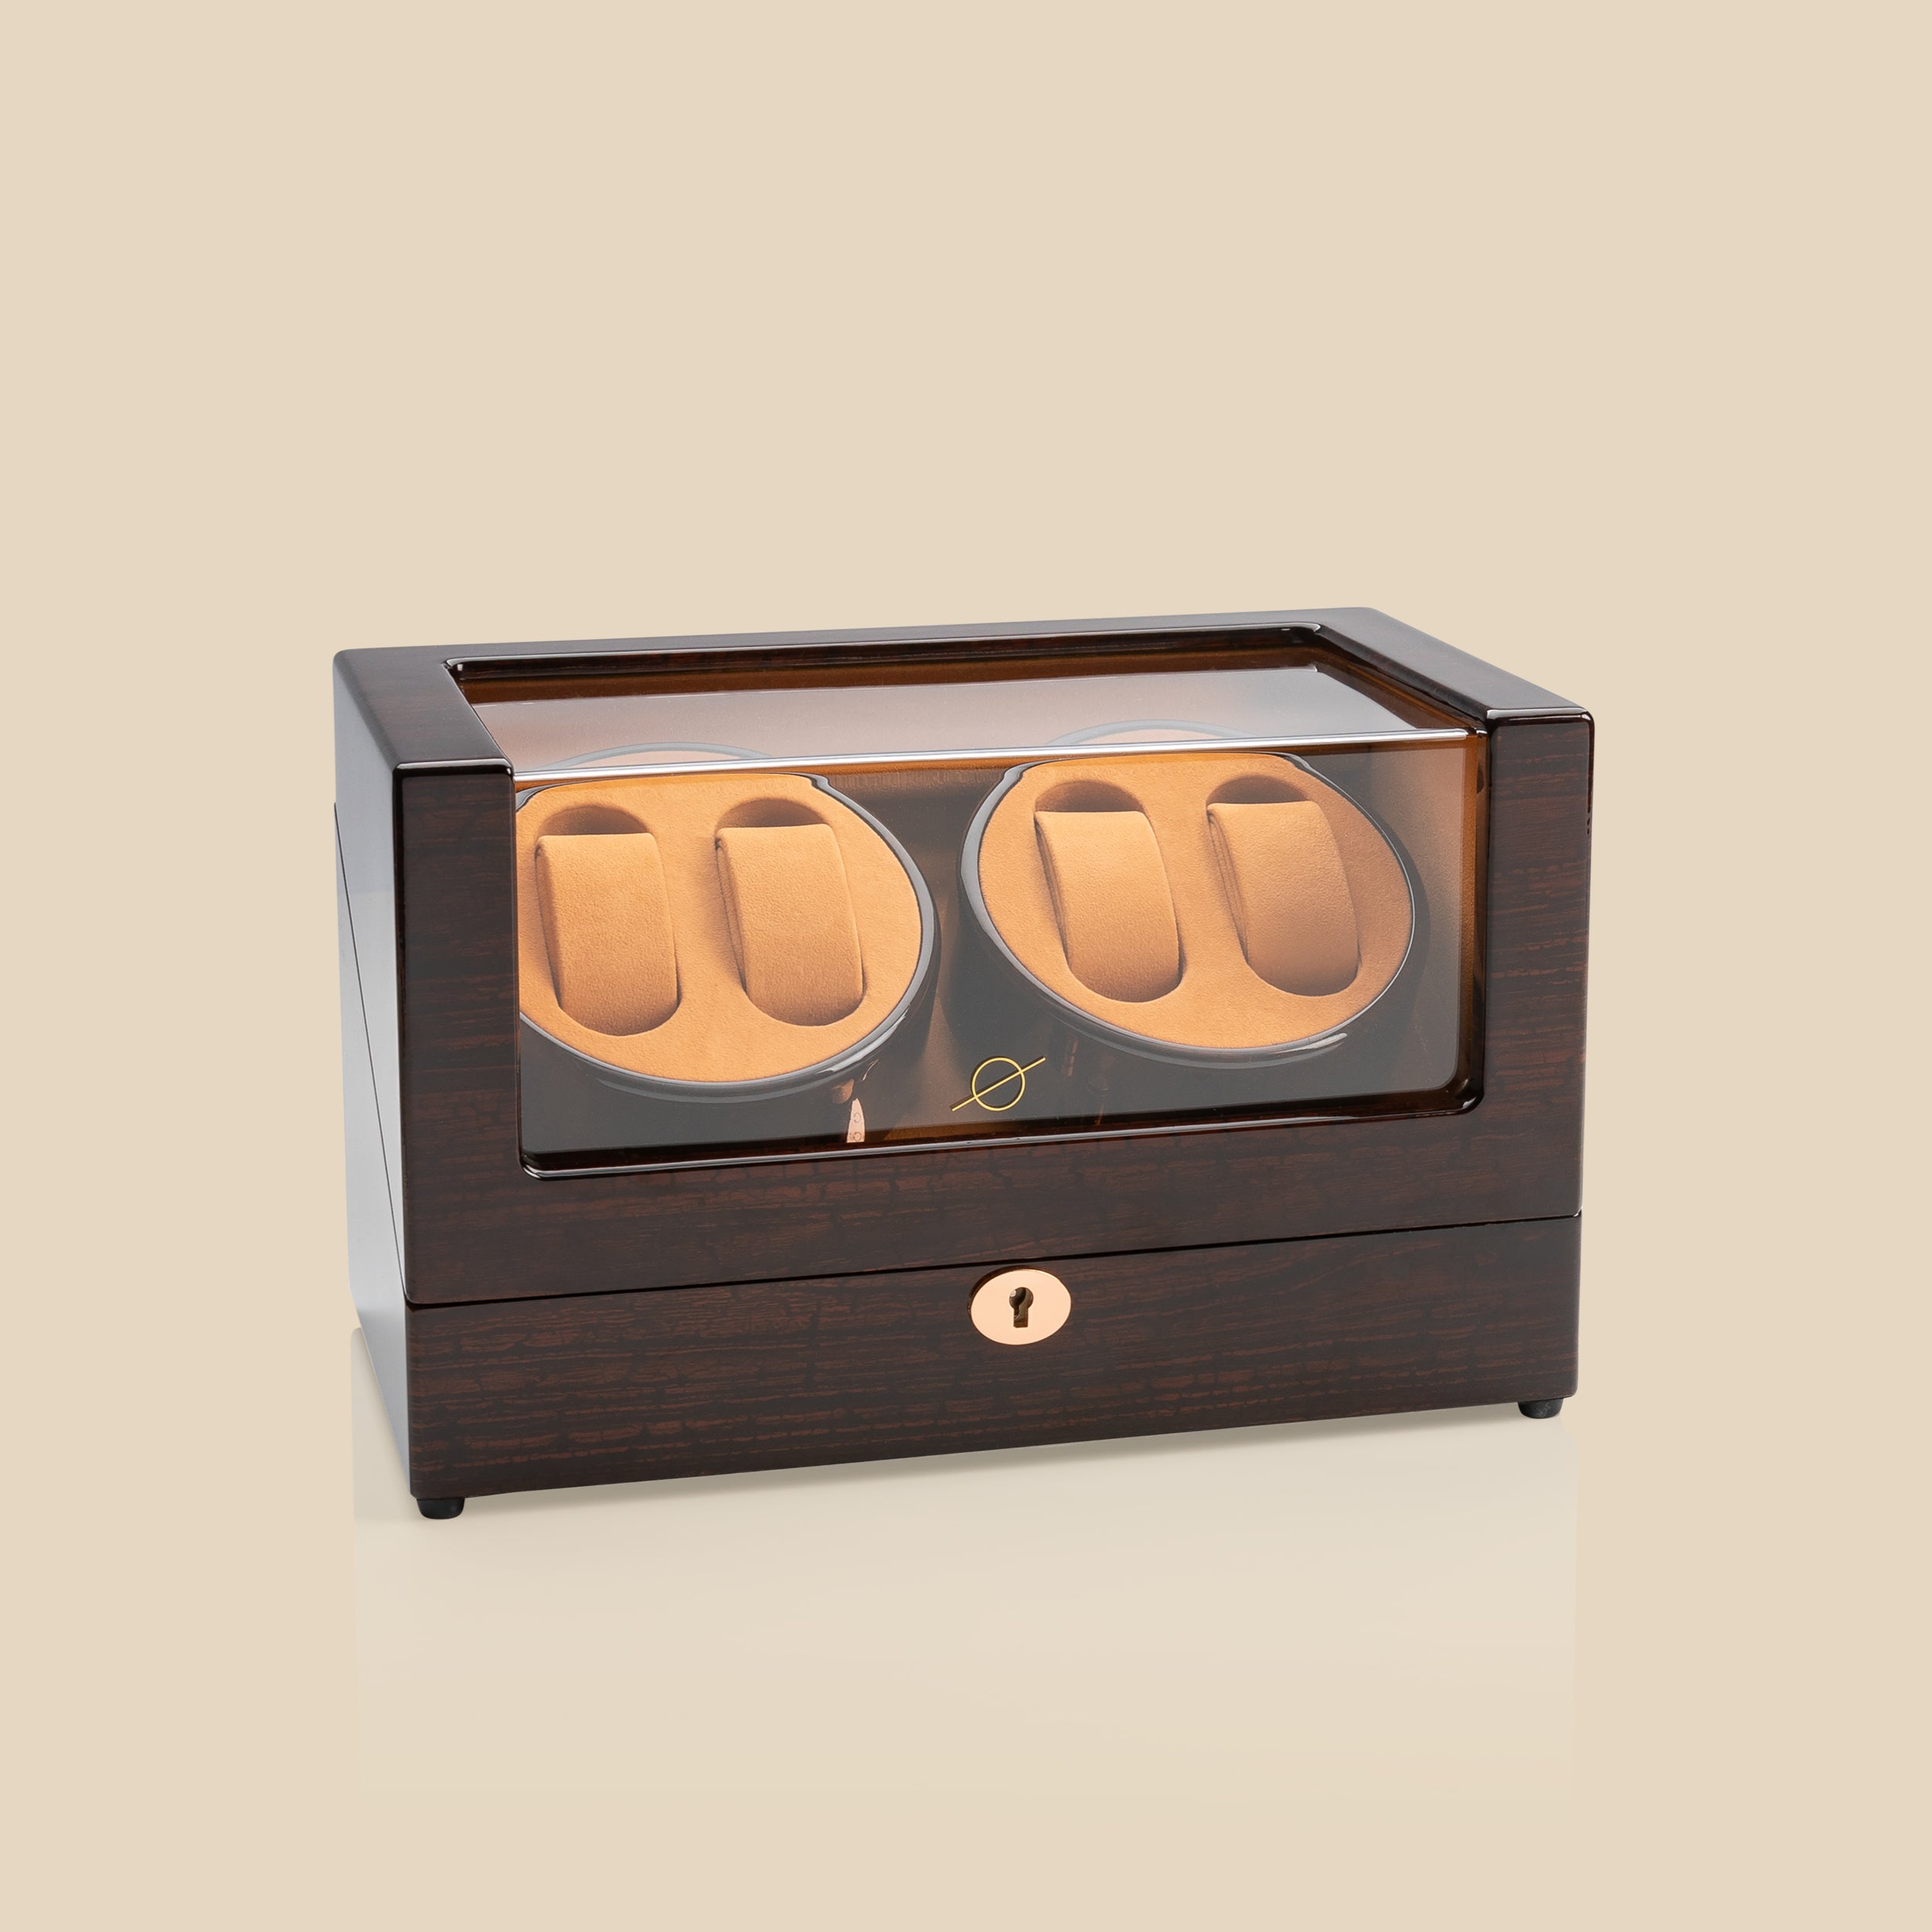 WW16 Watch Winder (Brown/Camel)- 4 Watches as